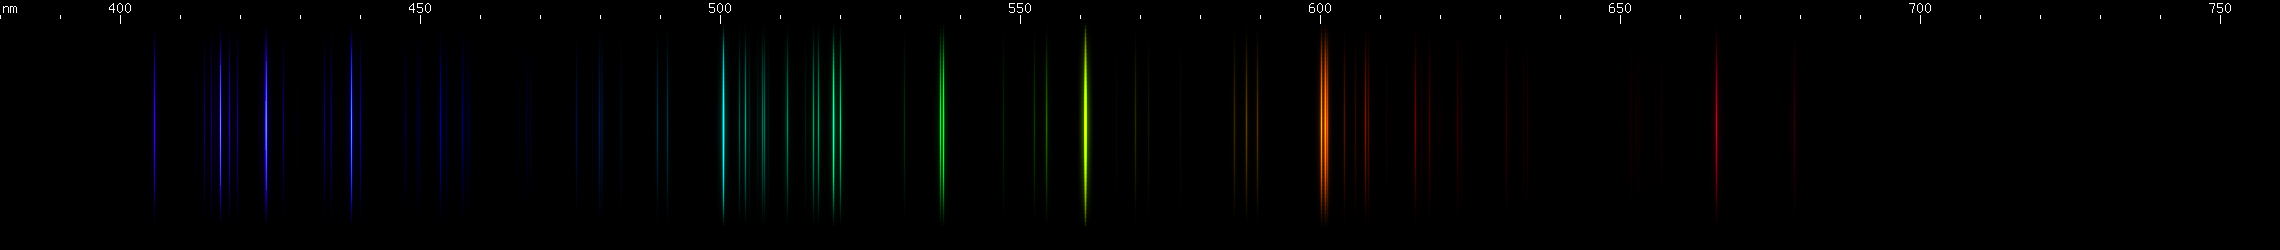 Spectral Lines of Lead